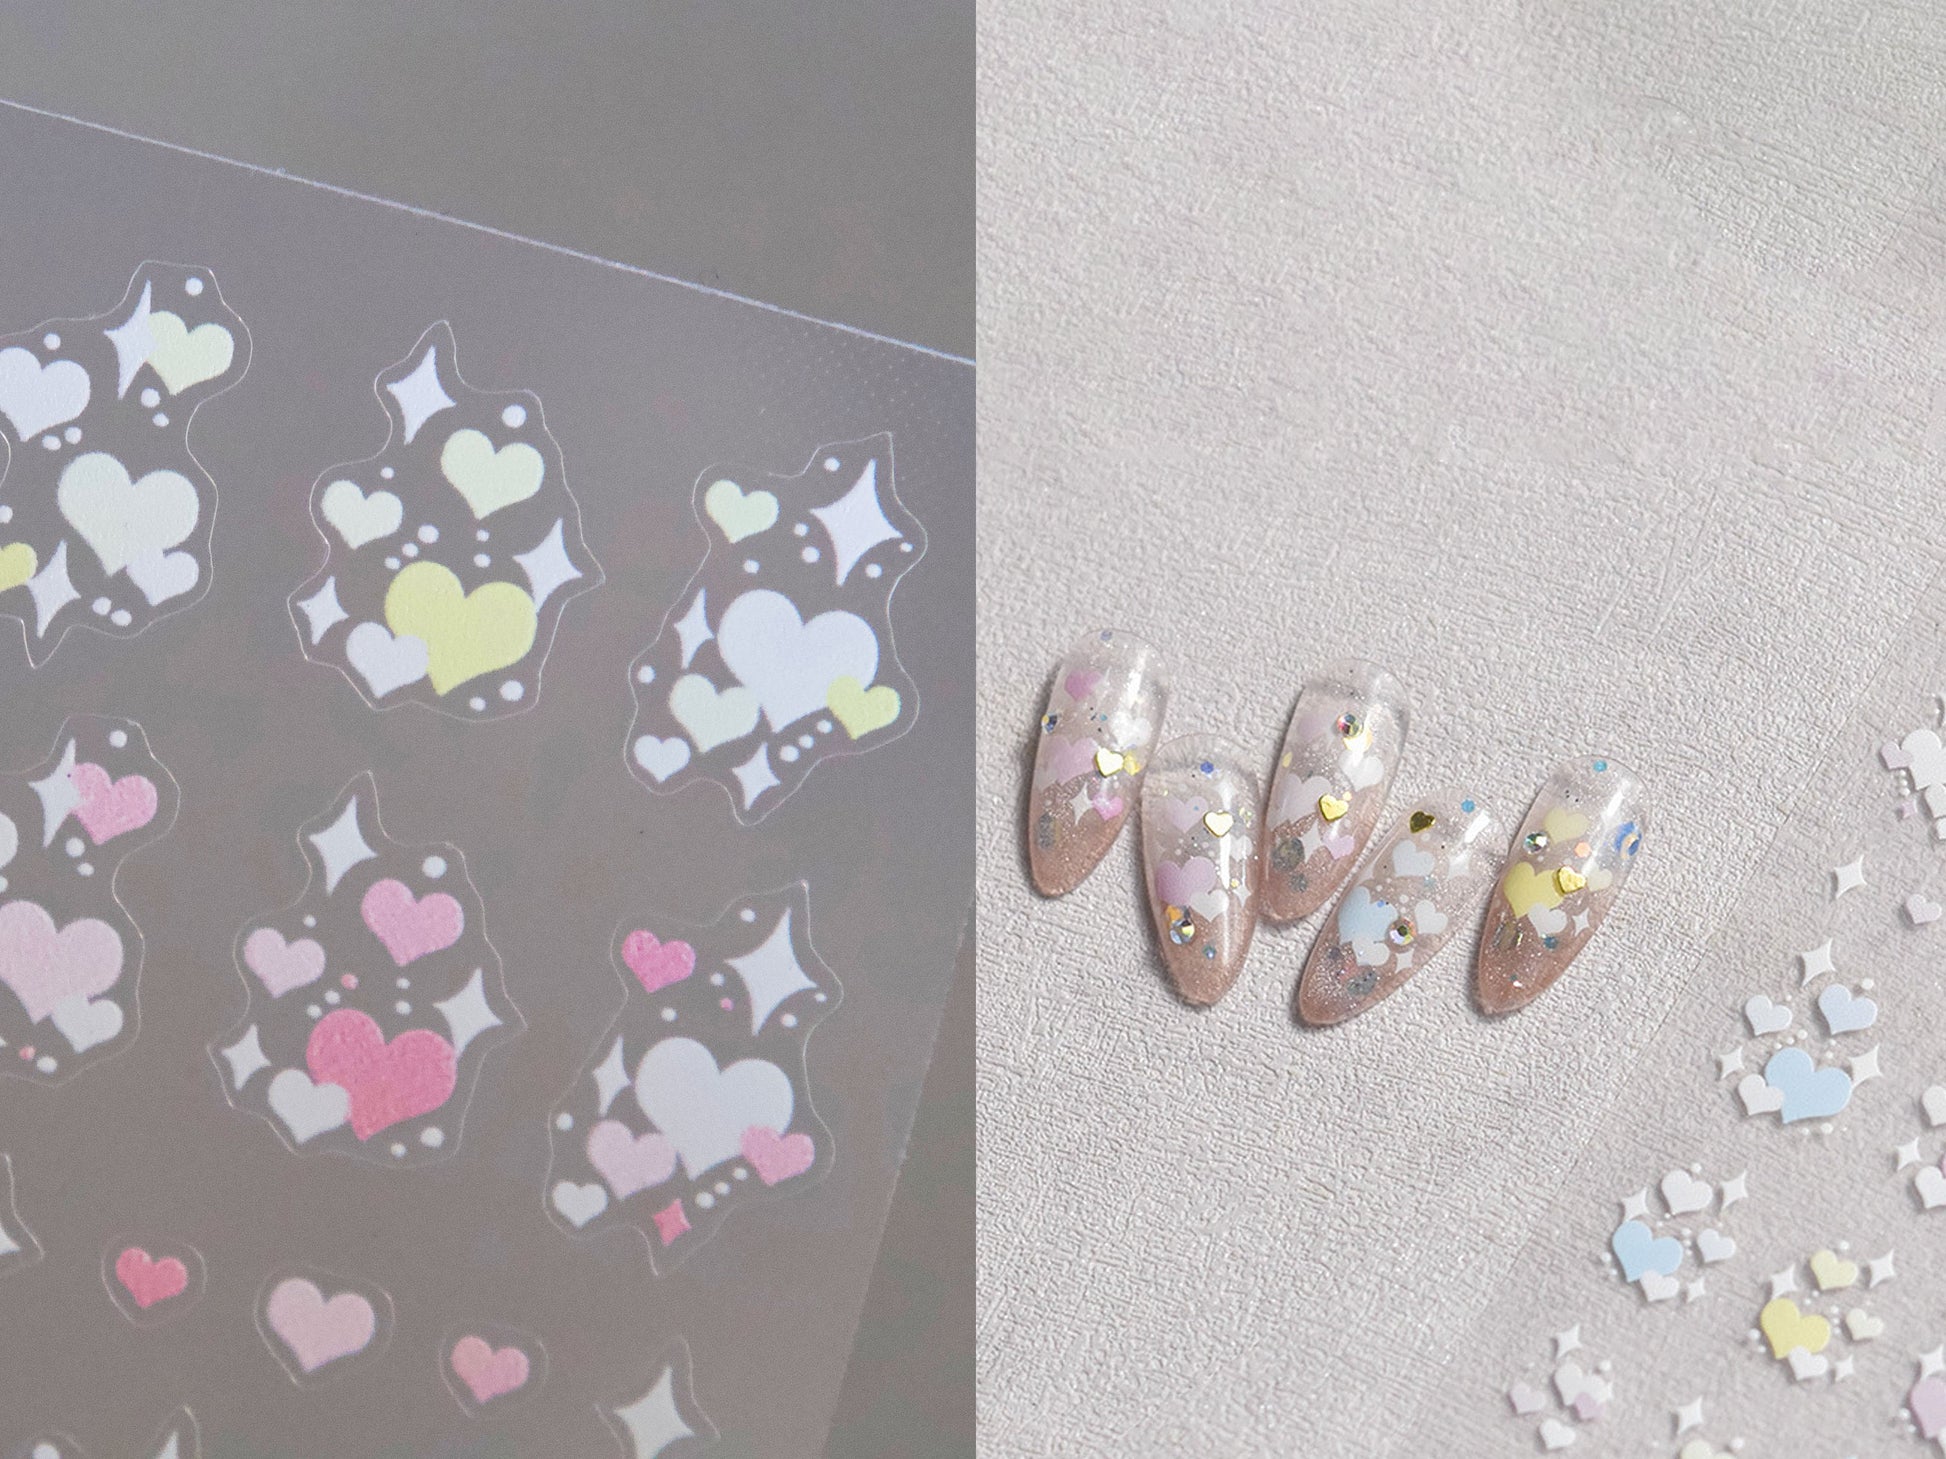 Twinkle Star Hearts Gradient Nail sticker/ Ultra thin Hearts Nail Art Stickers Decals/ Dazzle Stars Pinky Cute Valentine Manicure